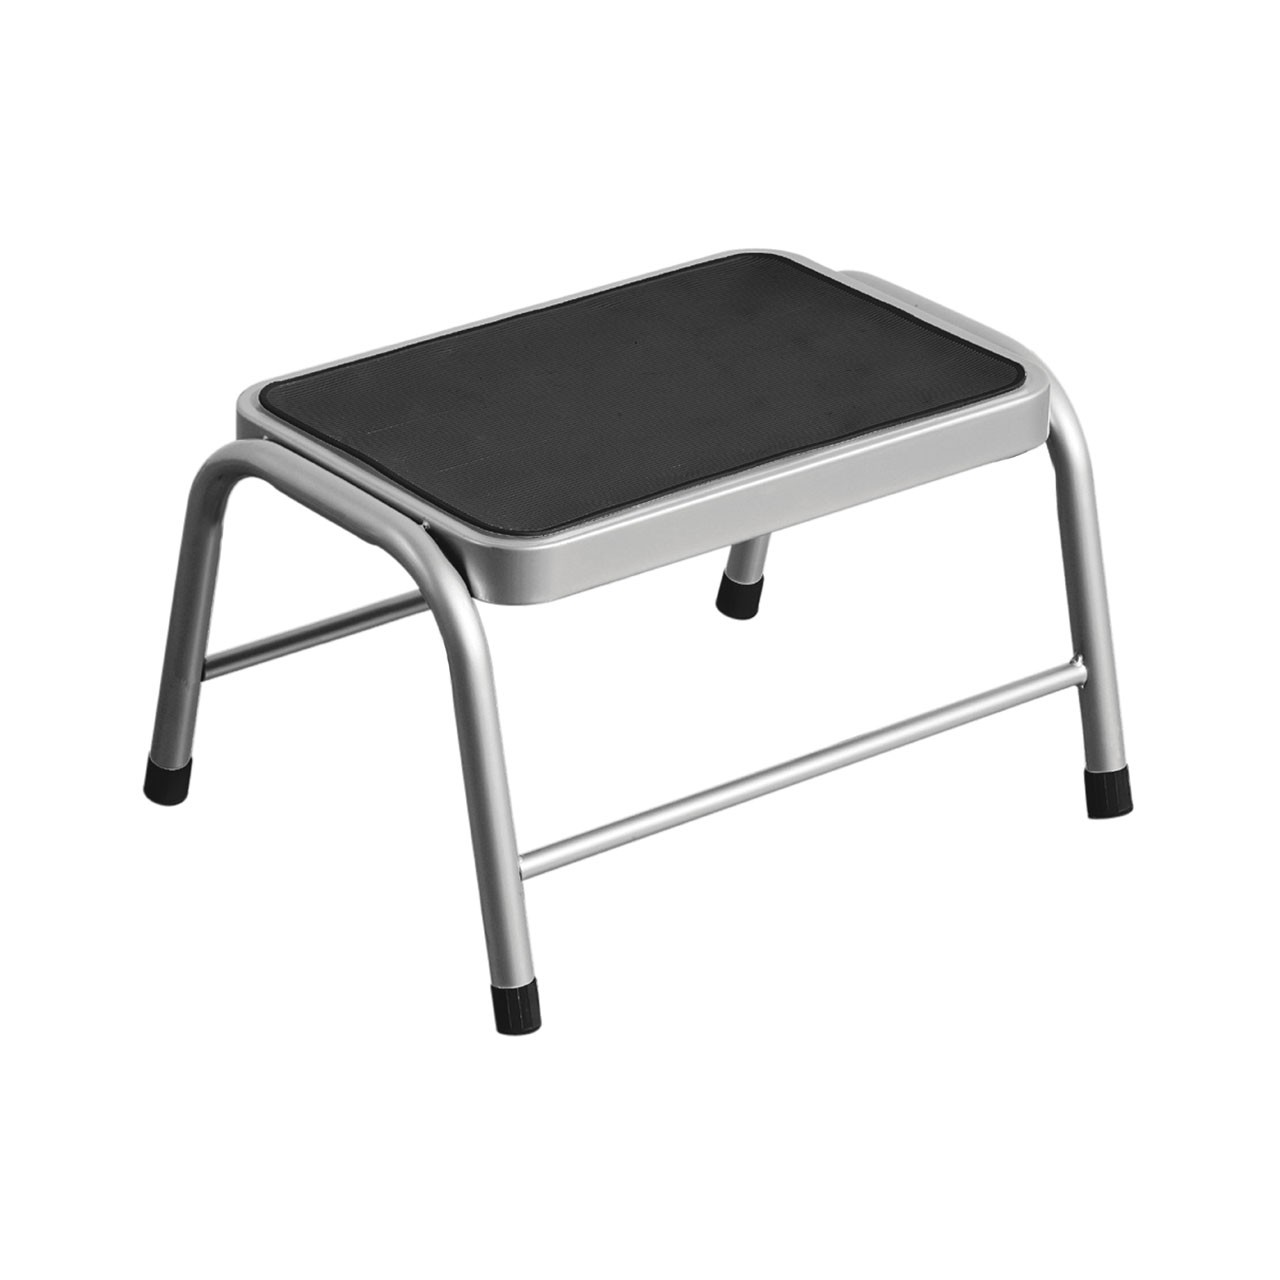 Prime Furnishing Step Stool,Black Rubber Top - Silver - Set Of 2